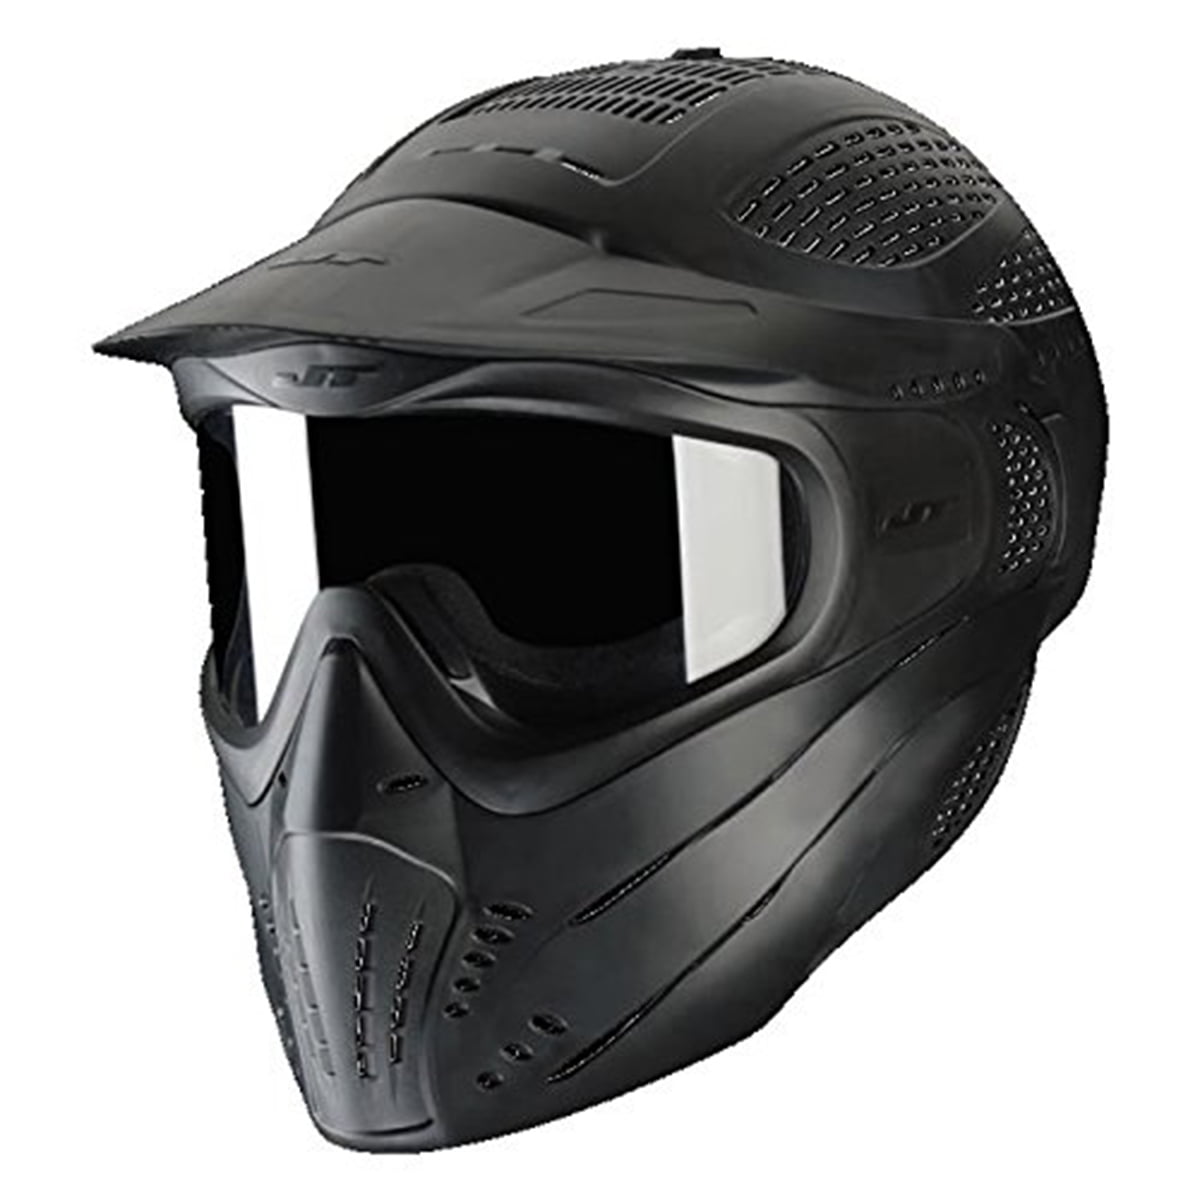 JT Premise Paintball Full Head Goggle Mask with Thermal Lens, Black